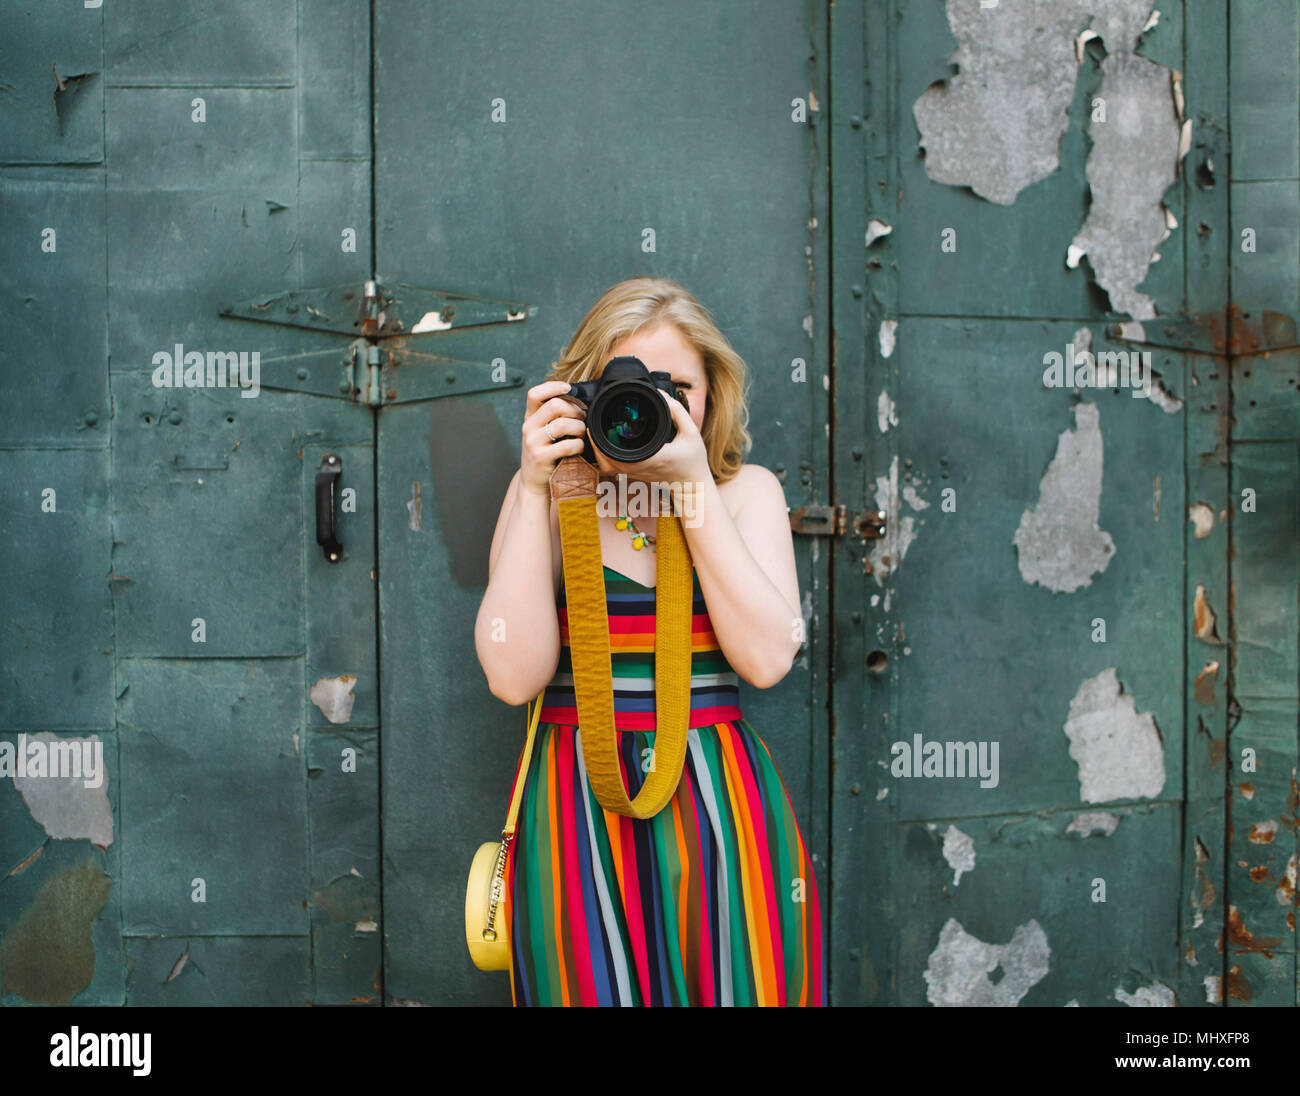 Young woman in striped dress in front of industrial door taking photographs, portrait Stock Photo